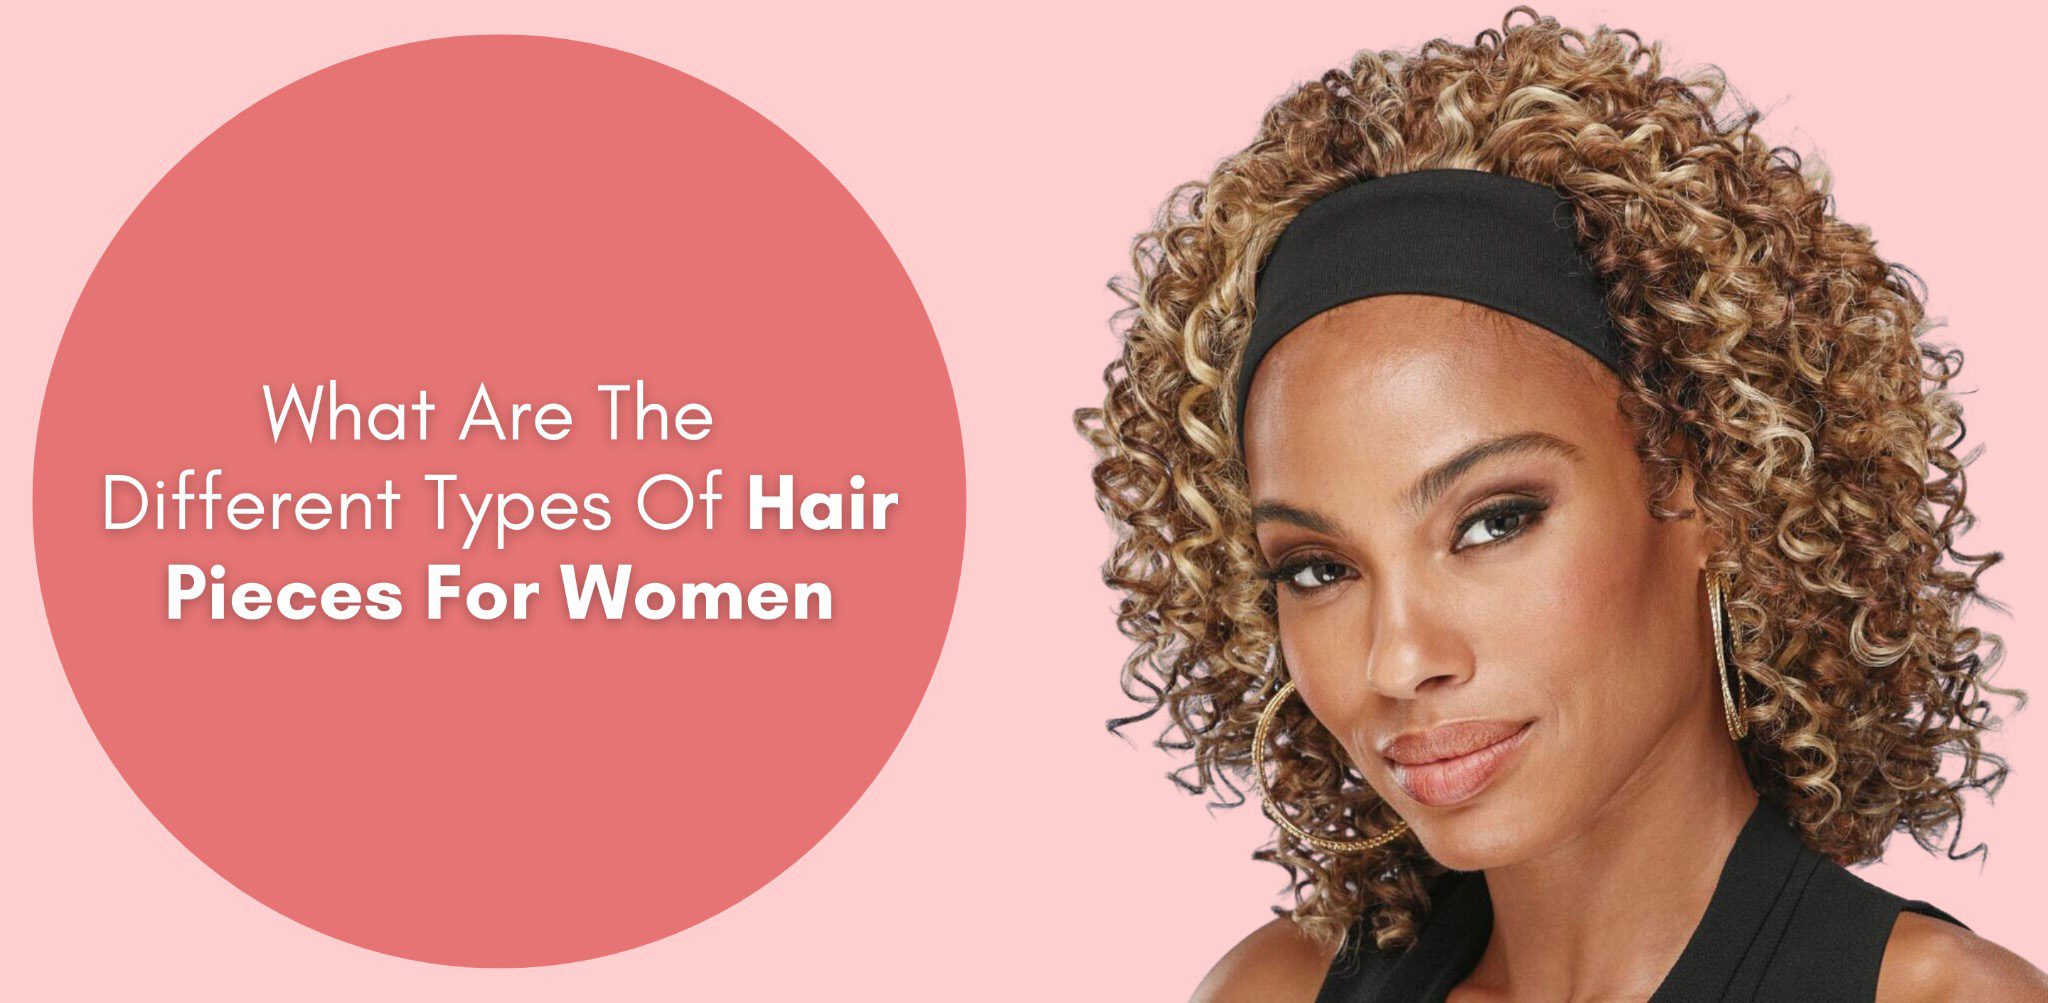 What Are The Different Types Of Hair Pieces For Women? | Especially Yours